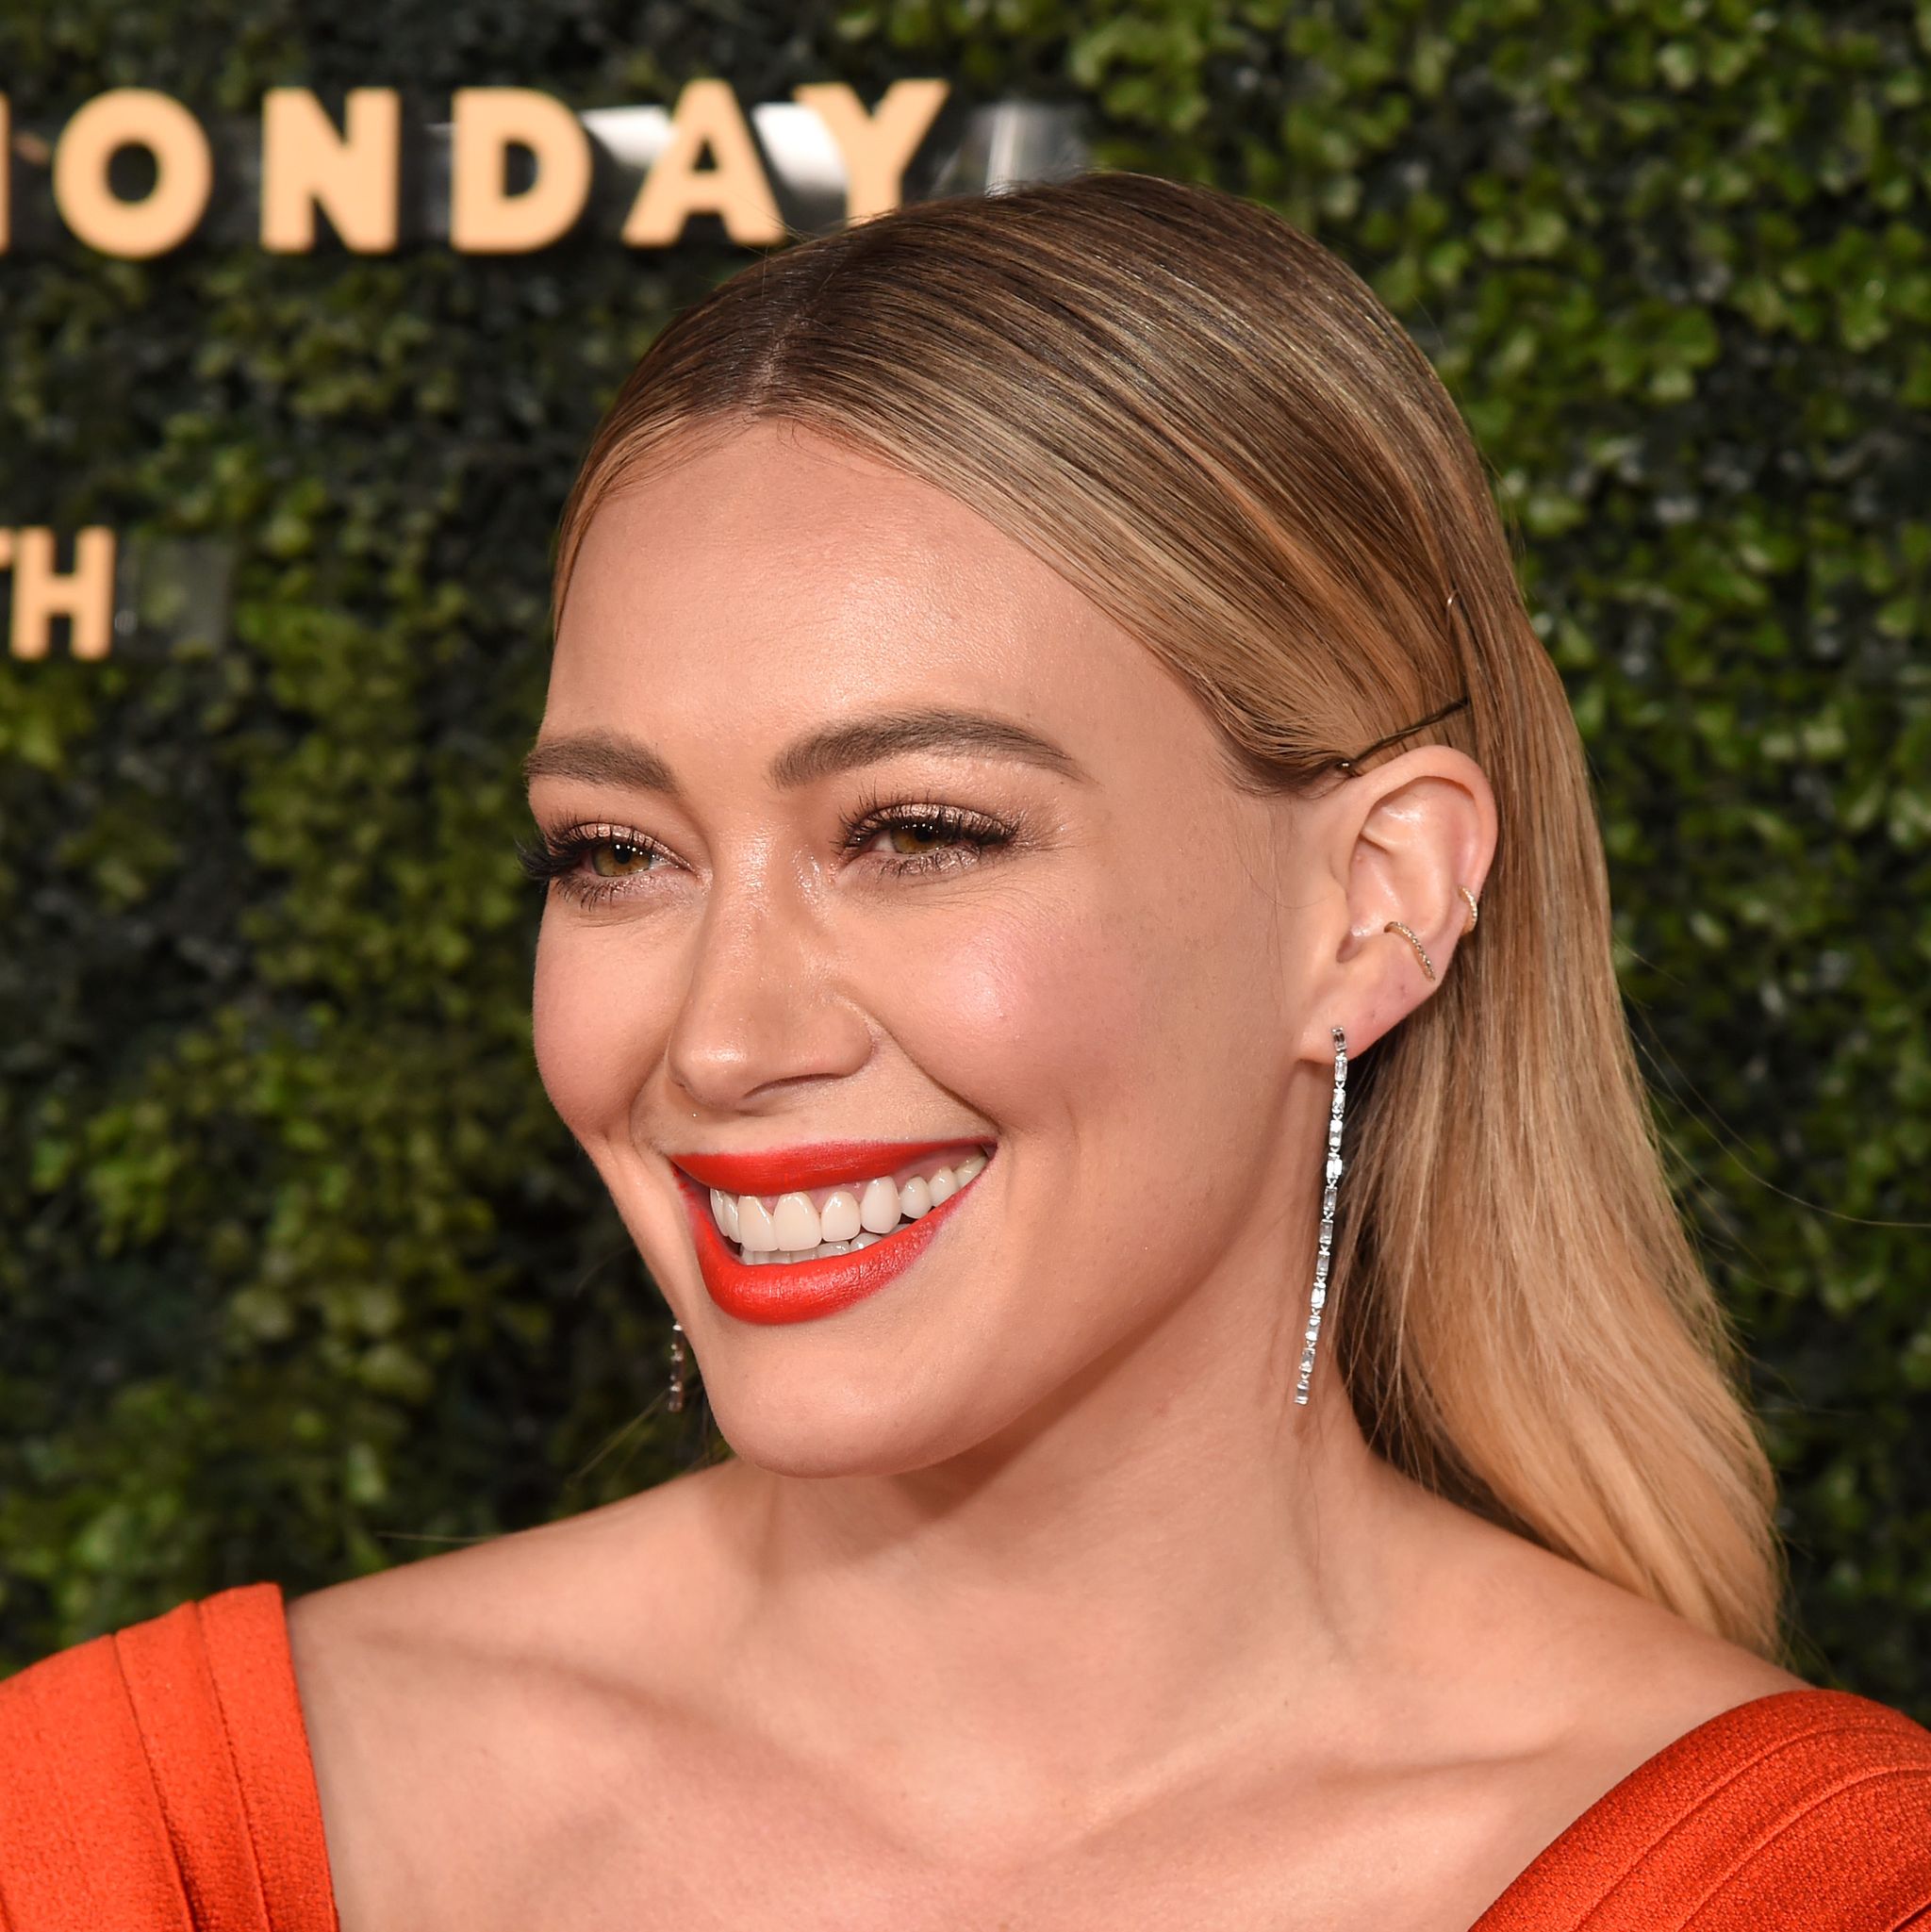 Hilary Duff on her beauty routine